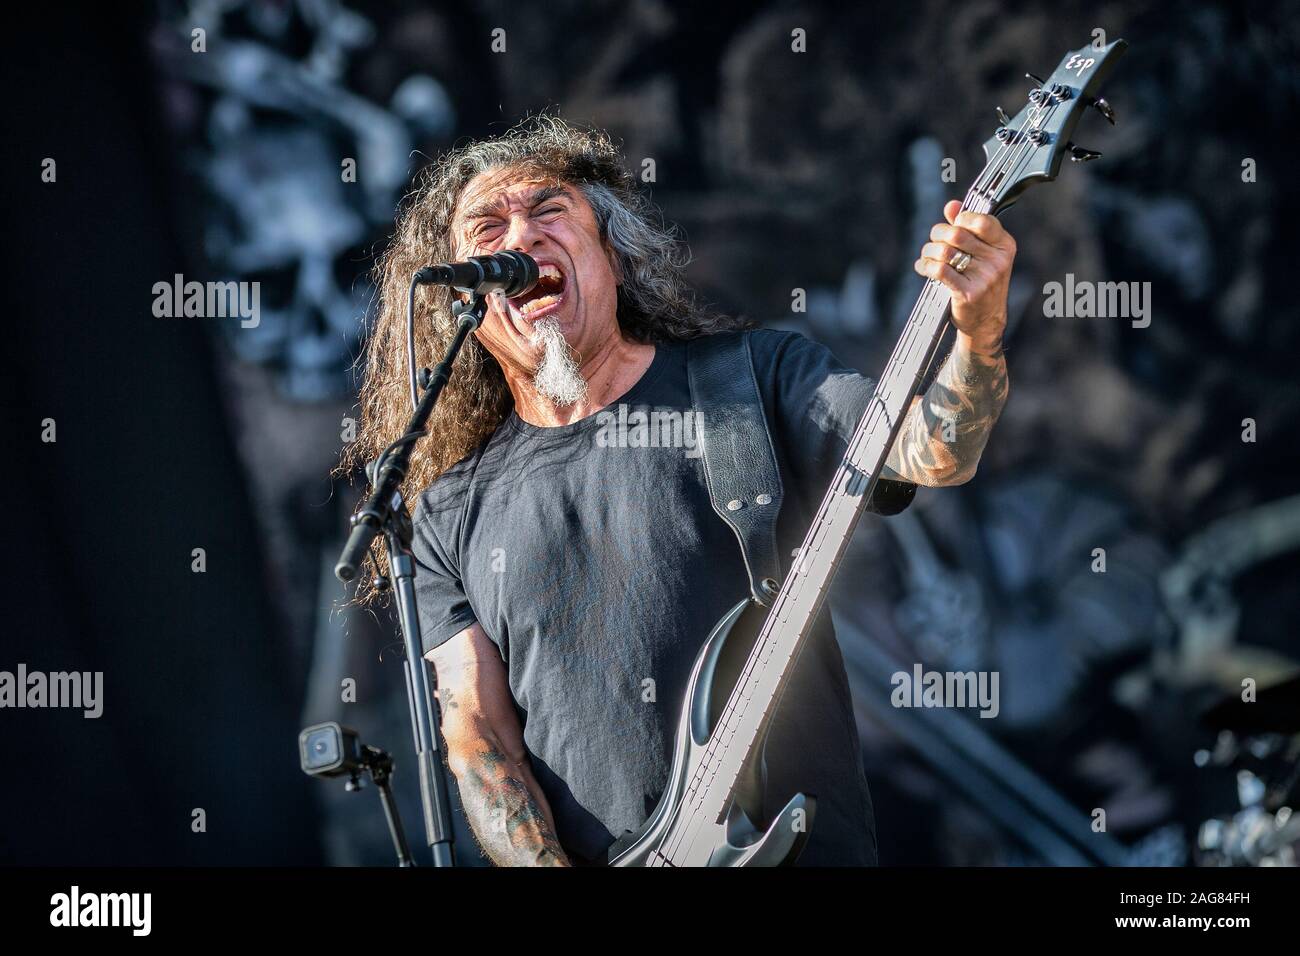 Oslo, Norway. 28th, June 2019. The American thrash metal band Slayer performs a live concert during the Norwegian music festival Tons of Rock 2019. Here vocalist and bass player Tom Araya is seen live on stage. (Photo credit: Gonzales Photo - Terje Dokken). Stock Photo